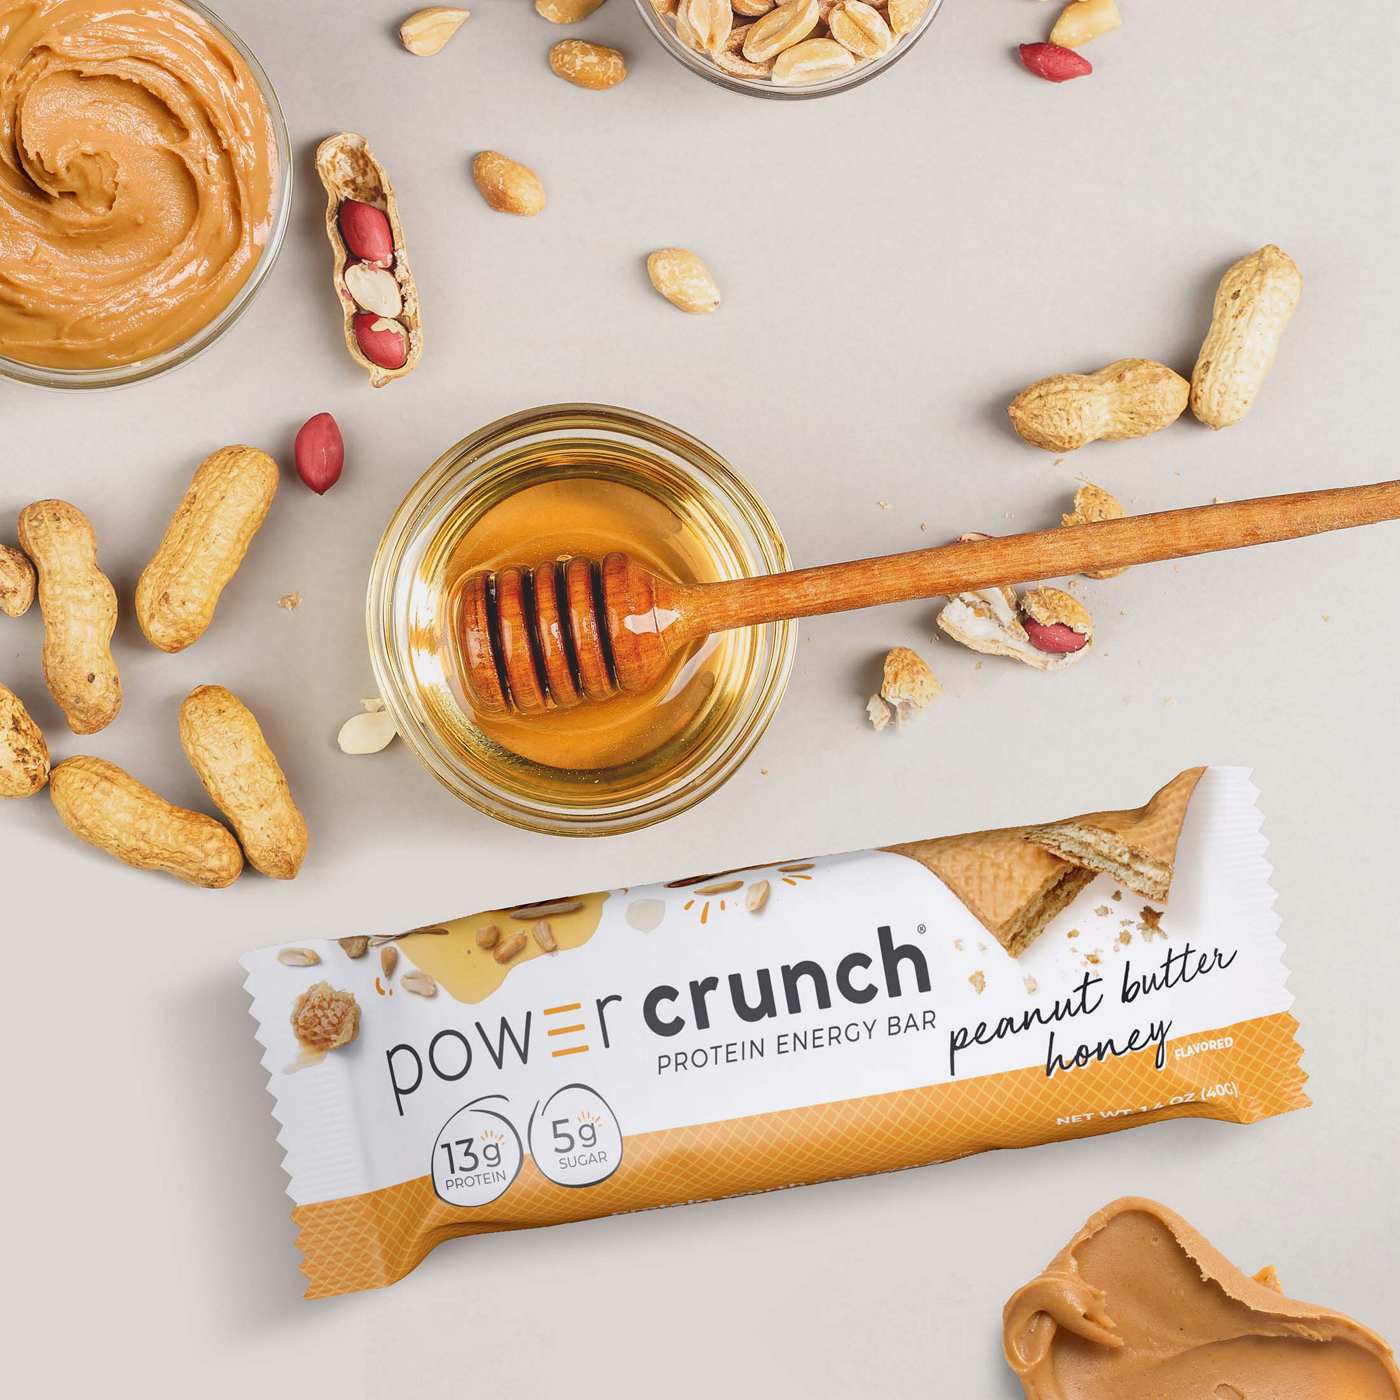 Power Crunch Protein Wafer Bars - Peanut Butter Honey; image 2 of 5